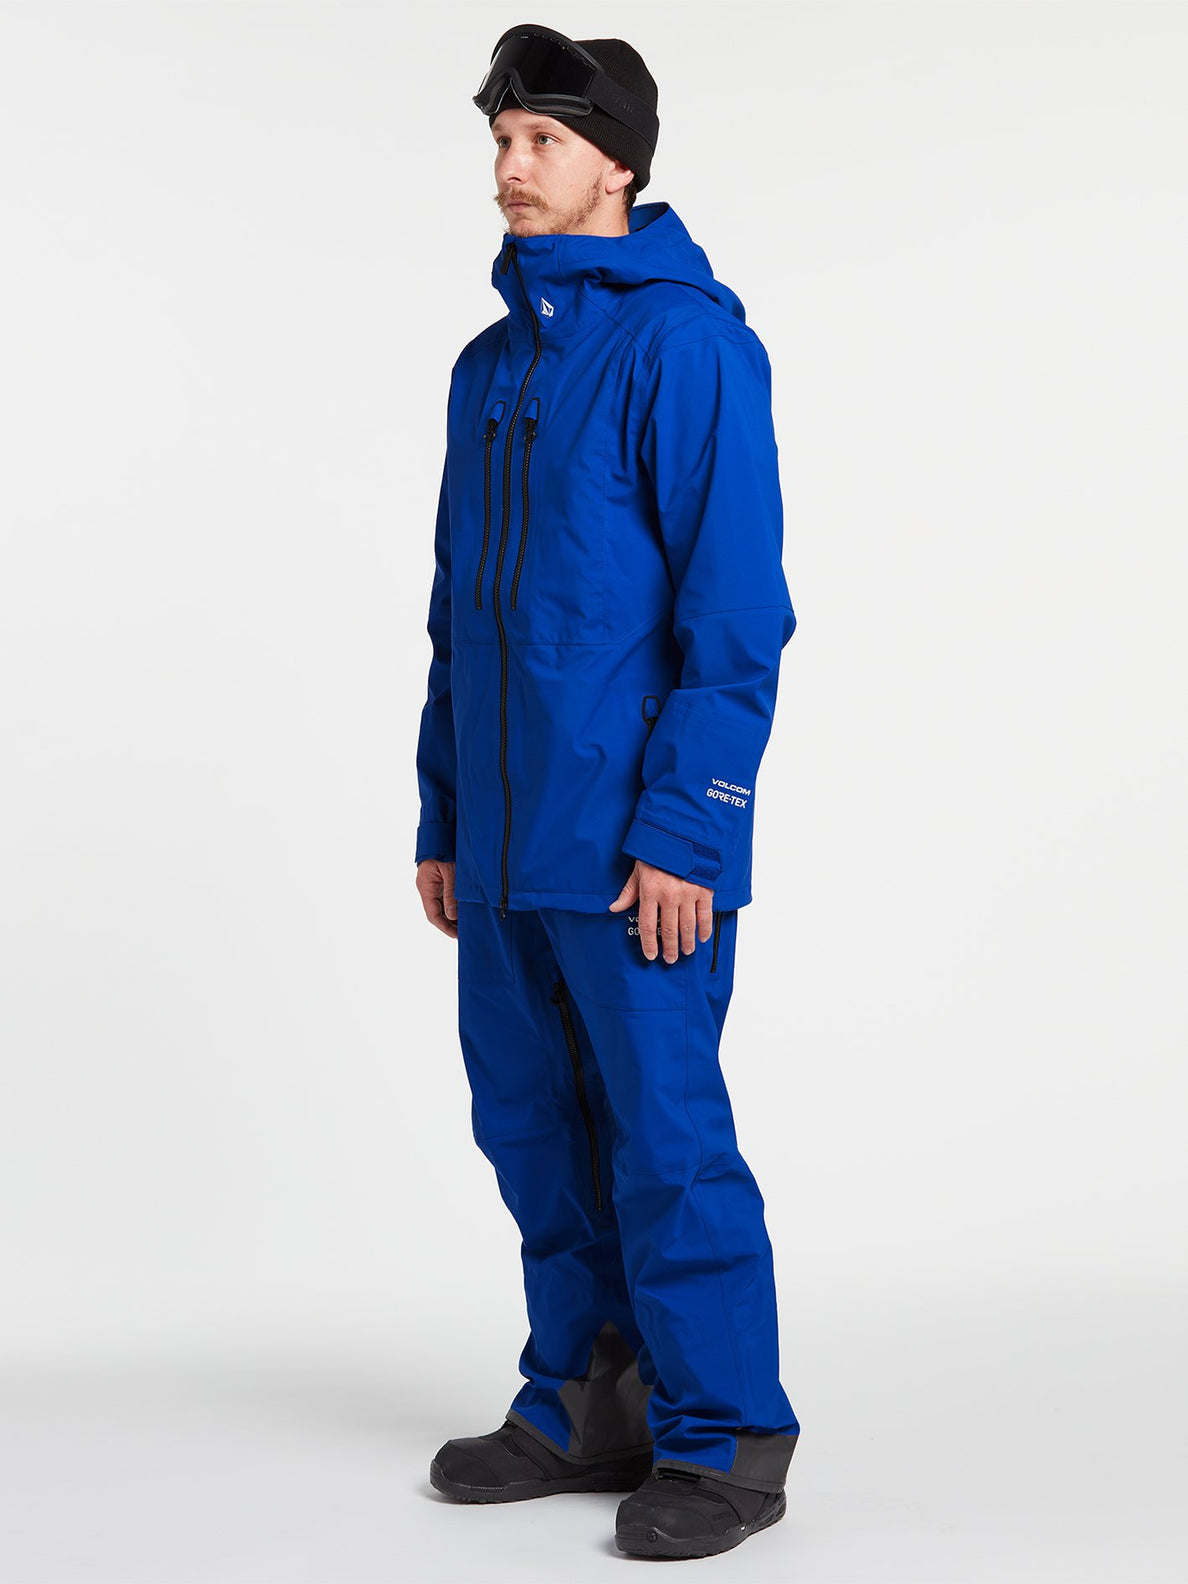 Guide Gore-Tex Jacket - BRIGHT BLUE (G0652202_BBL) [2]